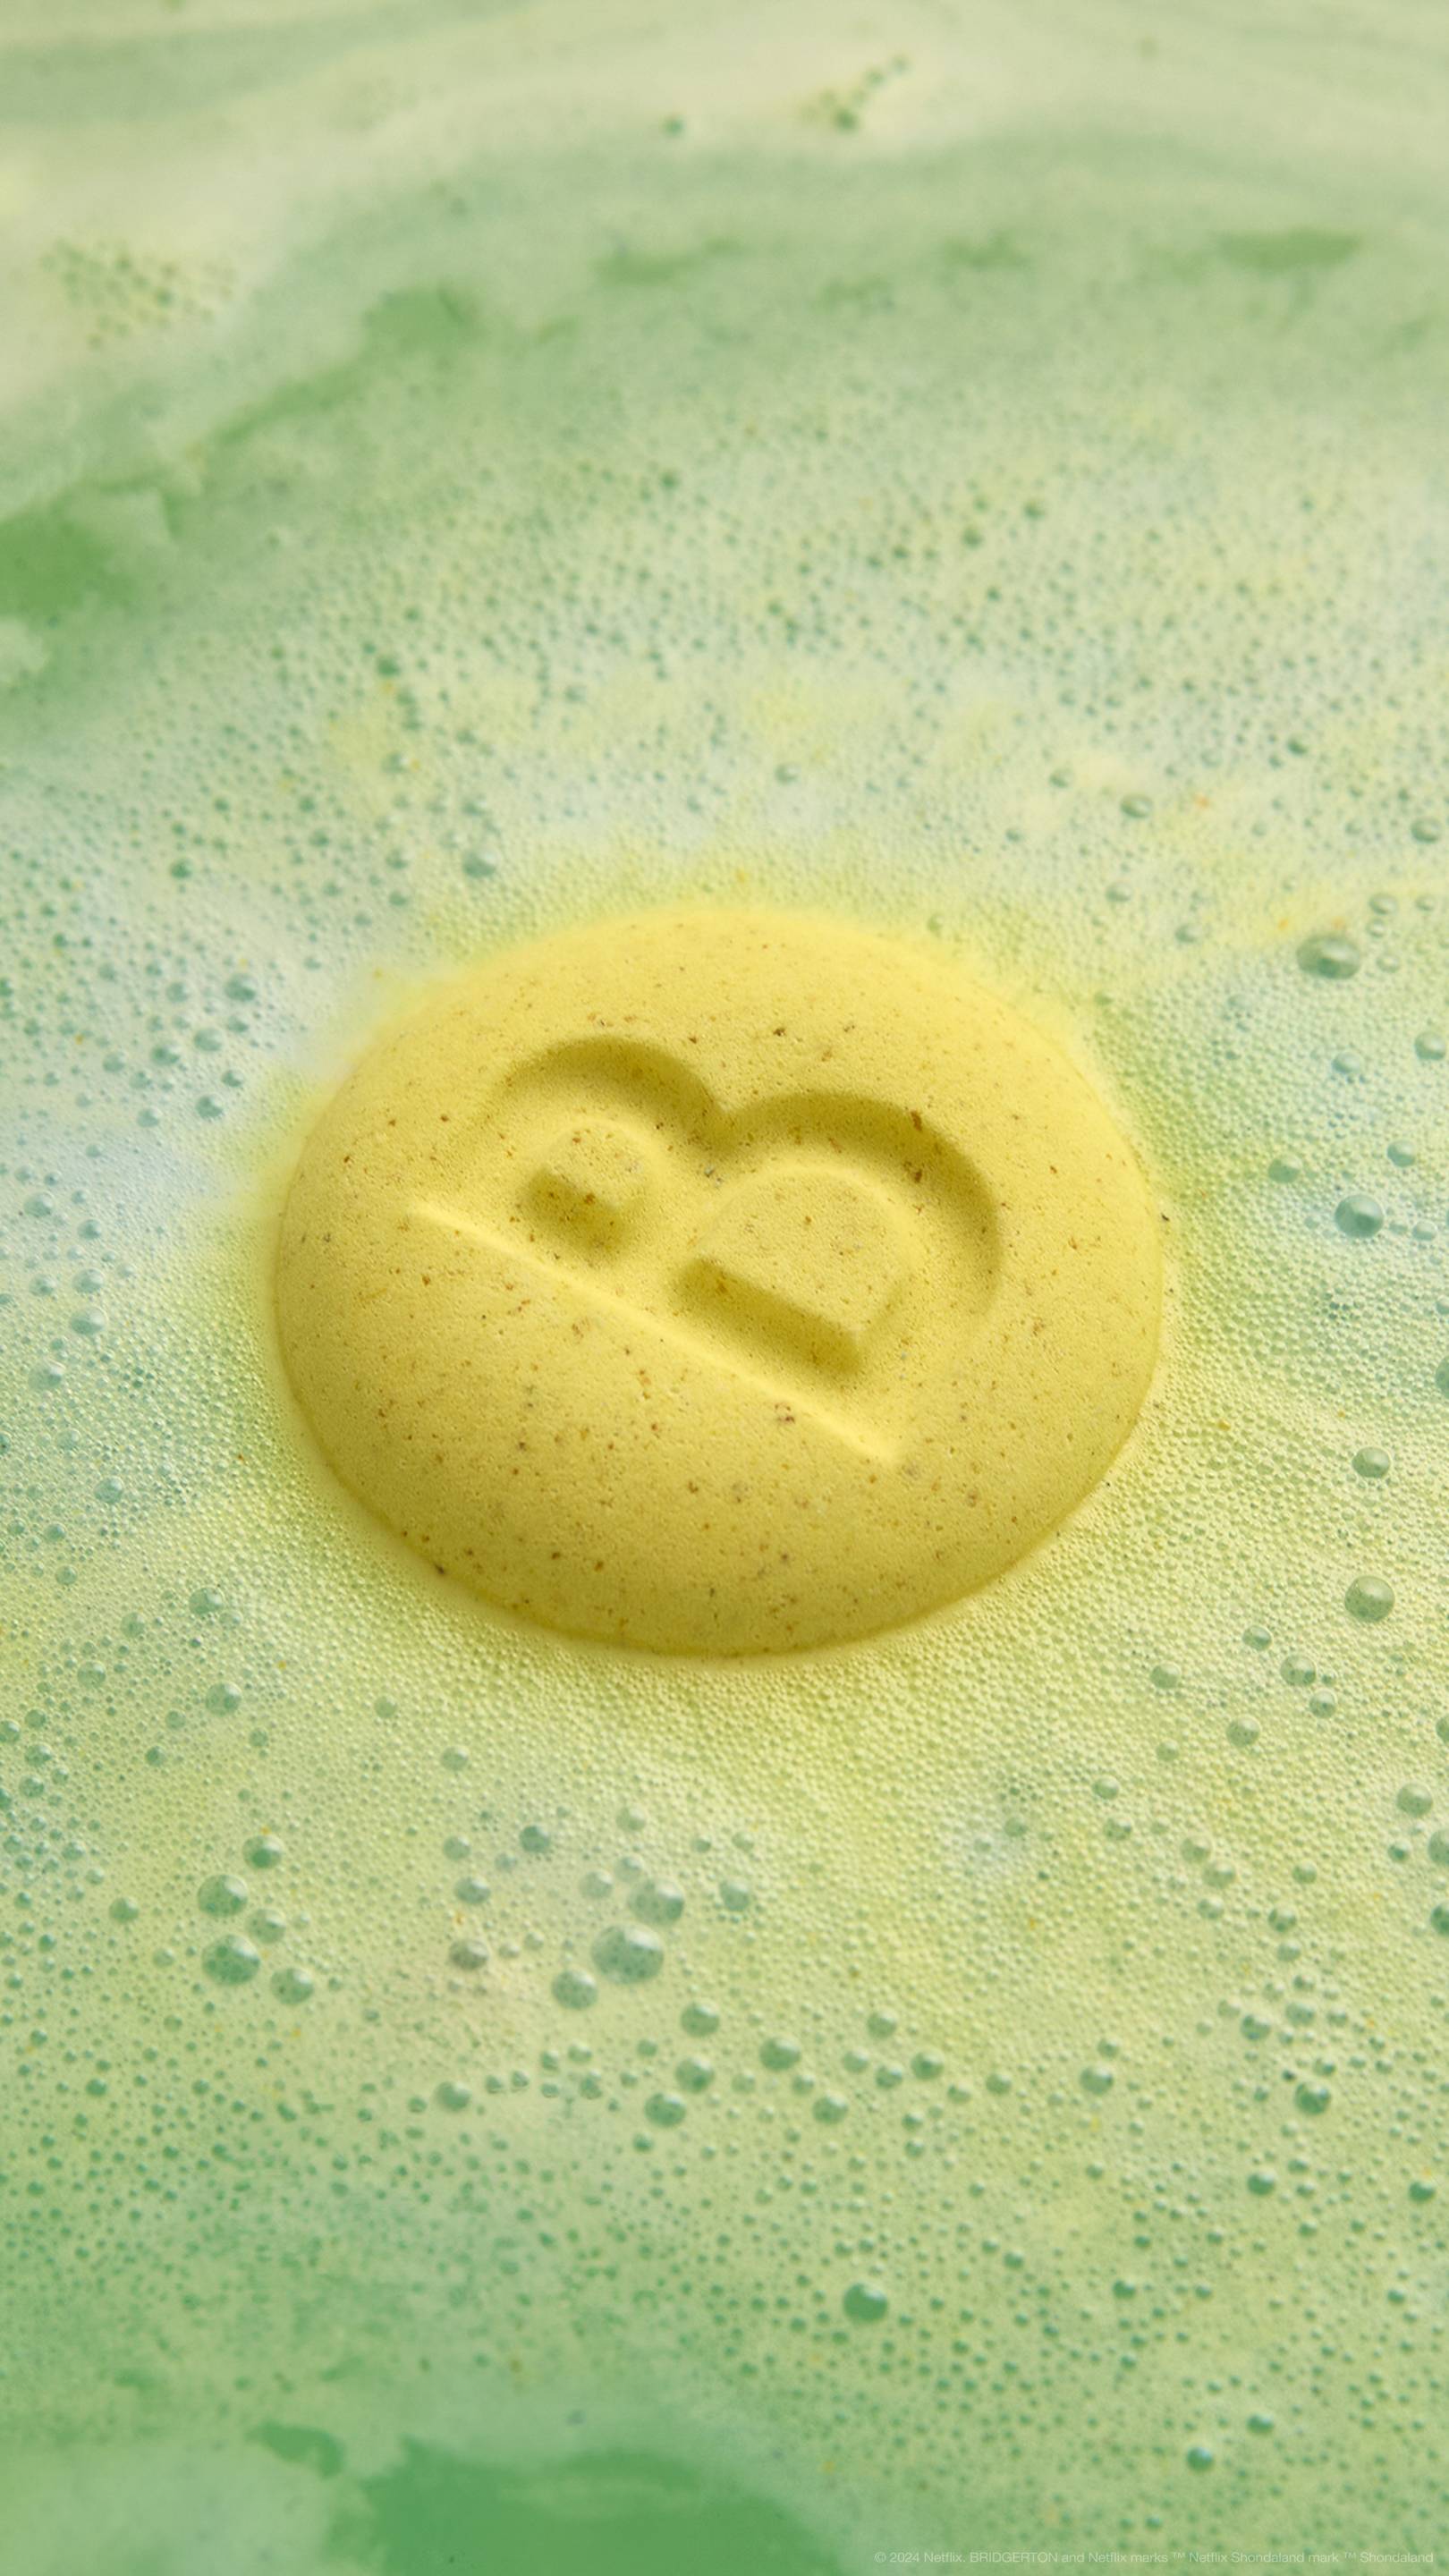 The image shows the Two Families bath bomb on the surface of the water with the yellow side with an embossed letter "B" facing up. Fresh green water lies beneath a layer of velvety foam.